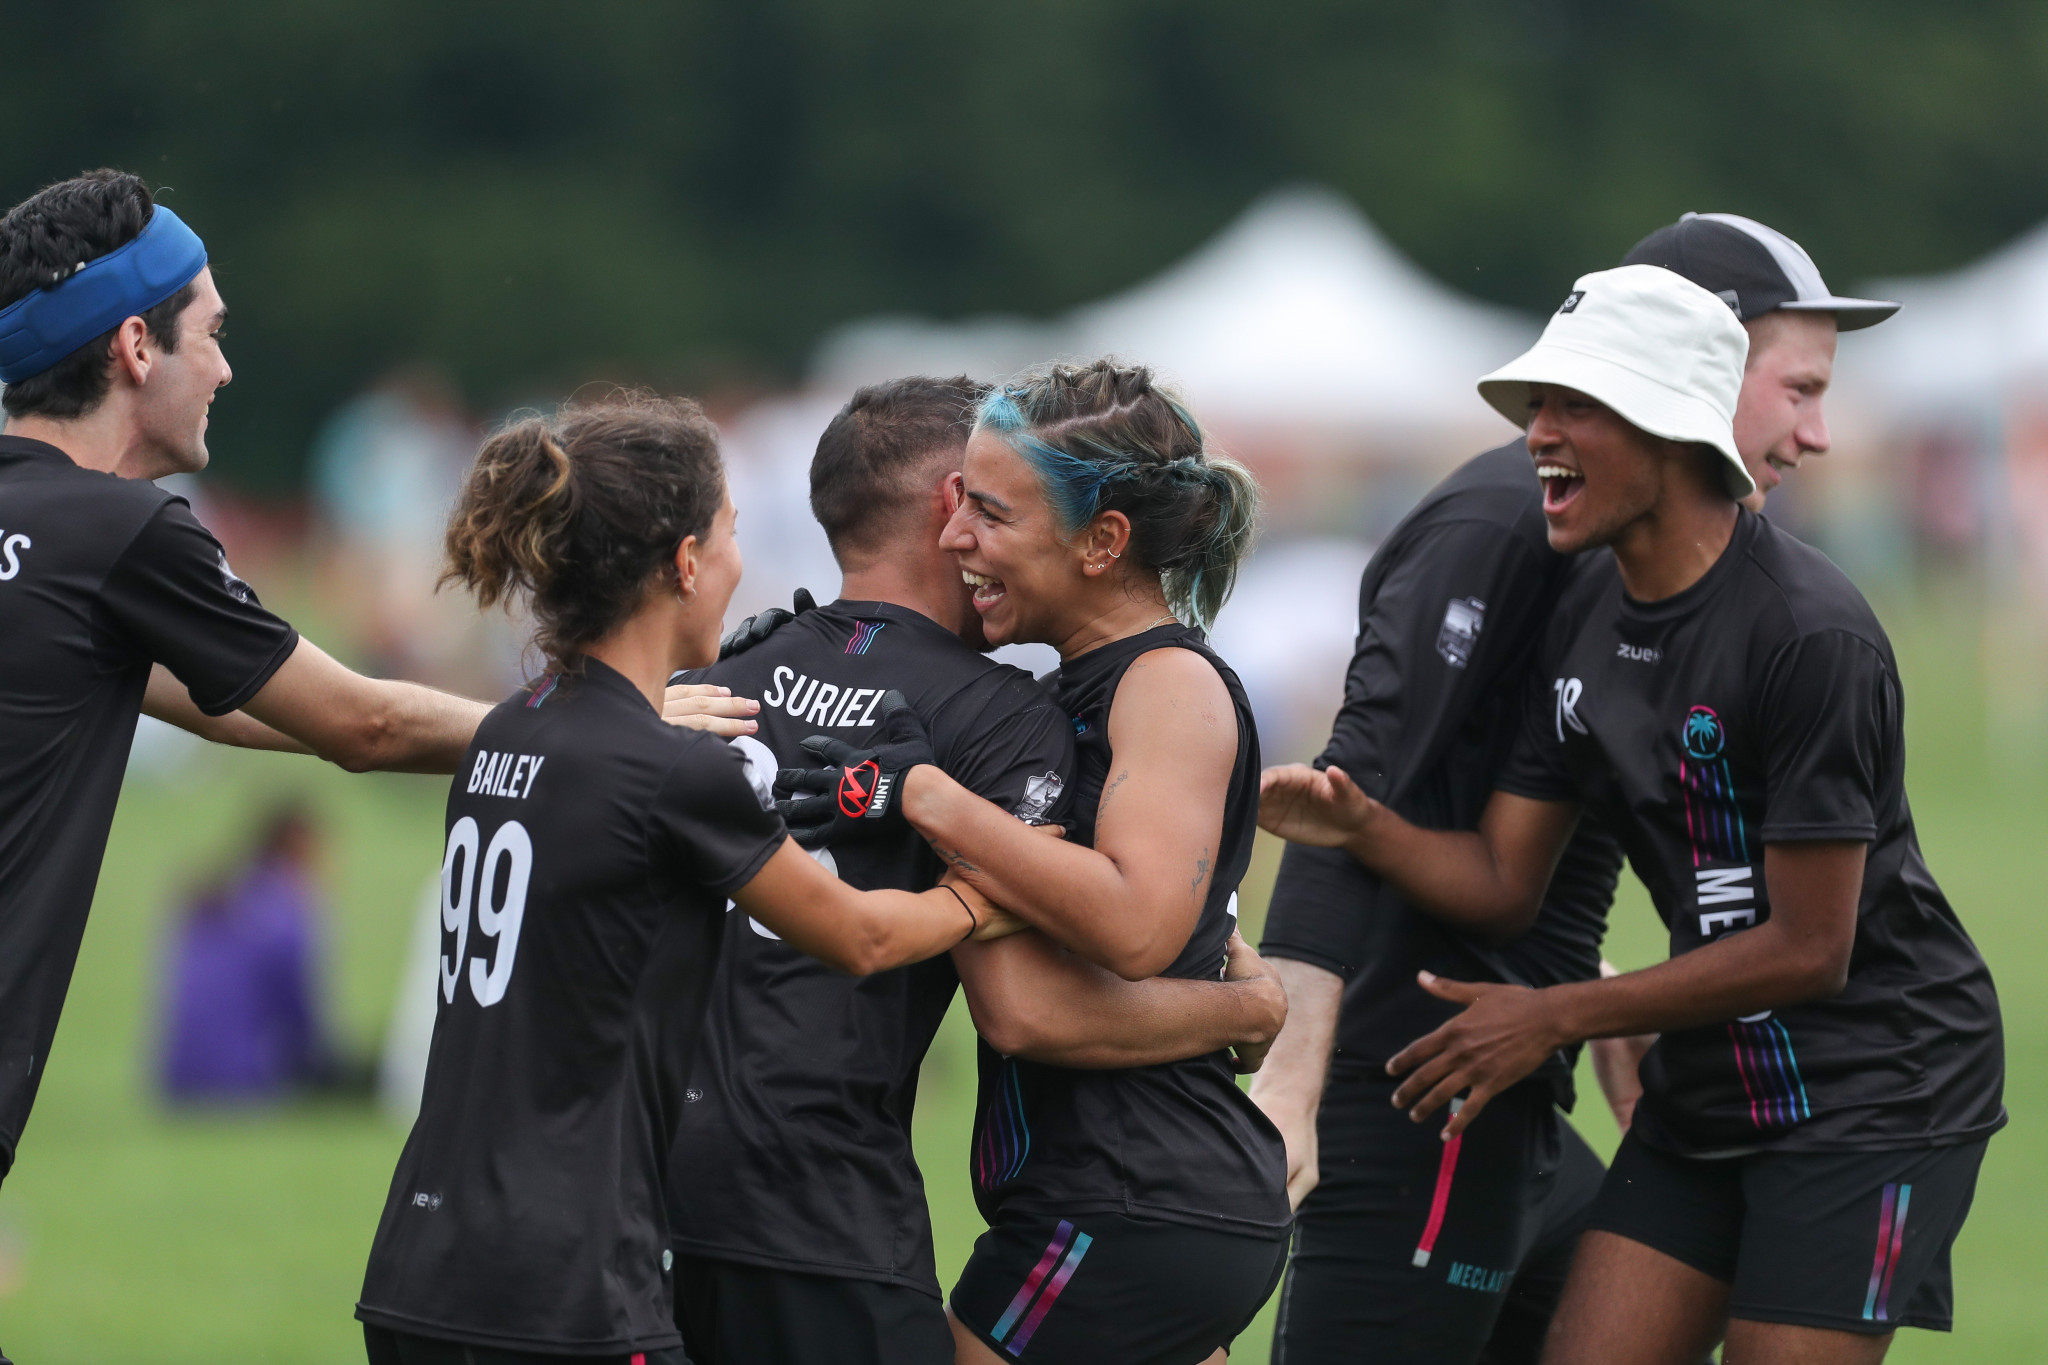 Meclao' stunned BFG in Pool A of the mixed team competitio' ©Paul Rutherford for UltiPhotos